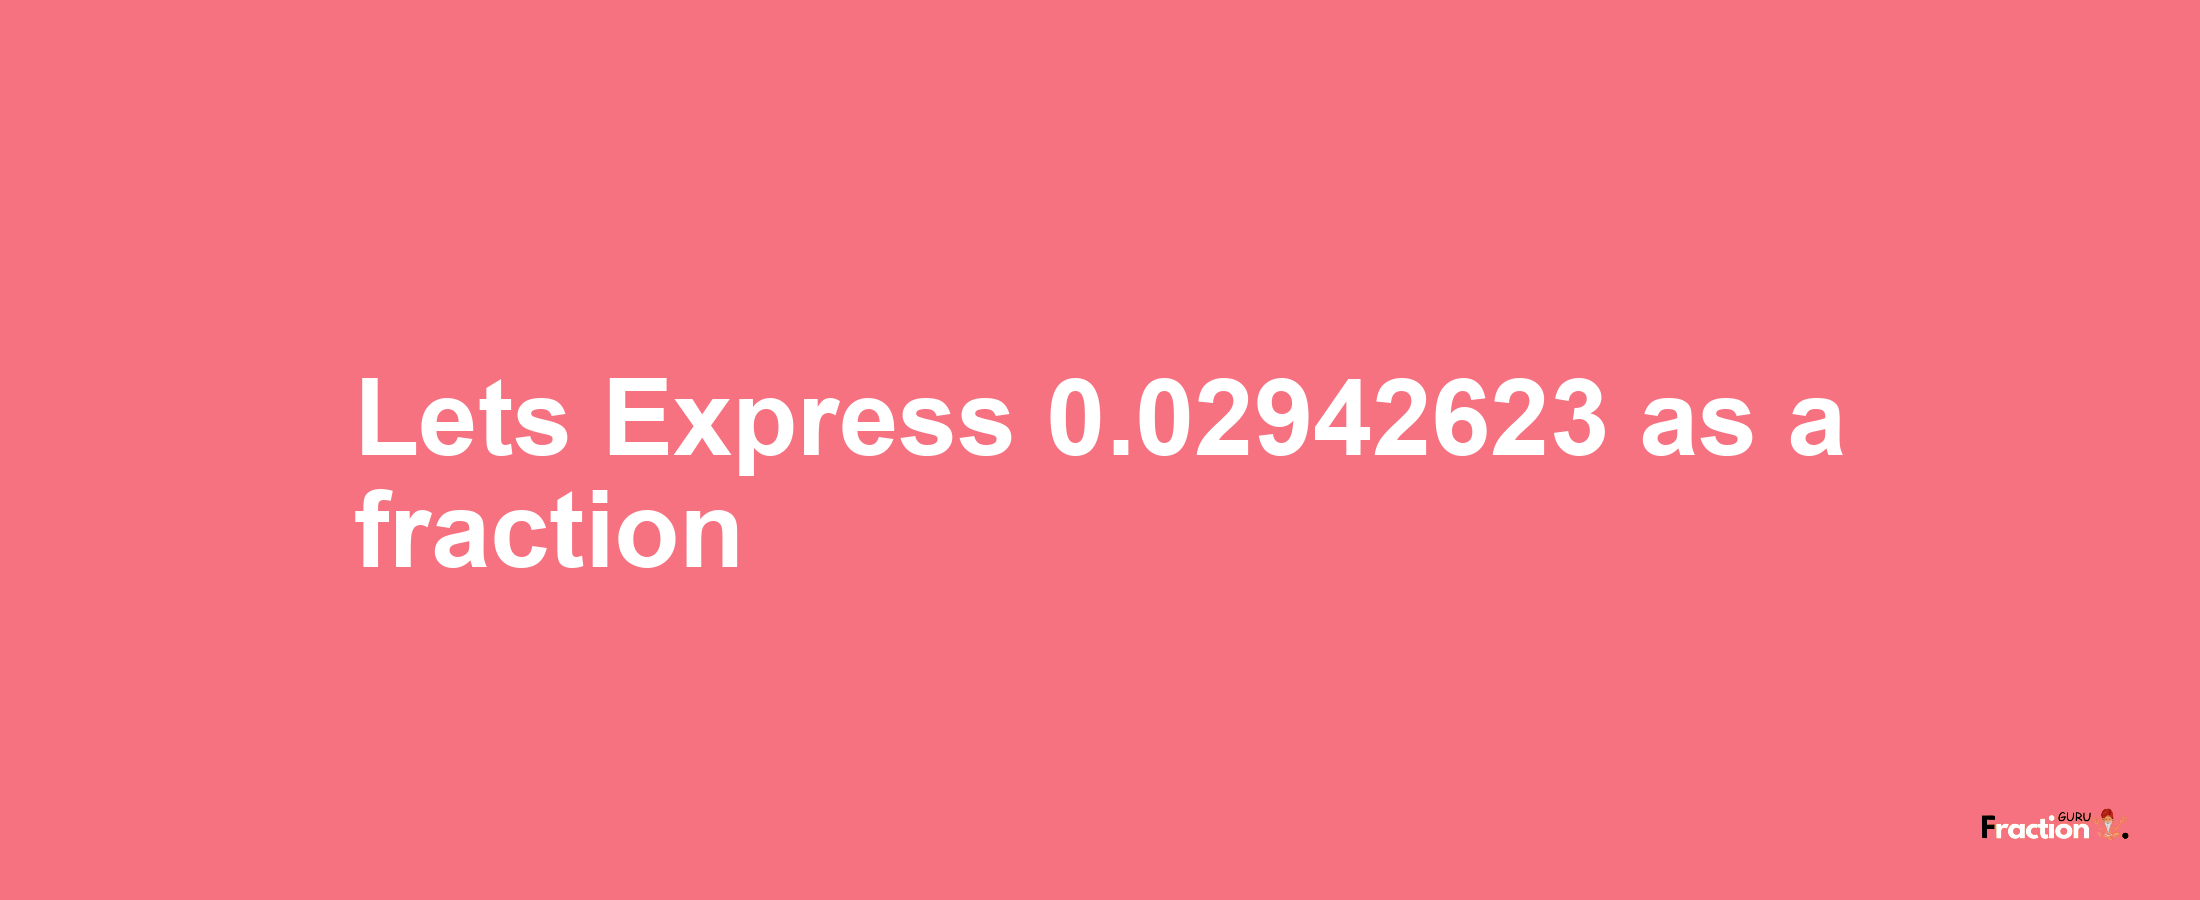 Lets Express 0.02942623 as afraction